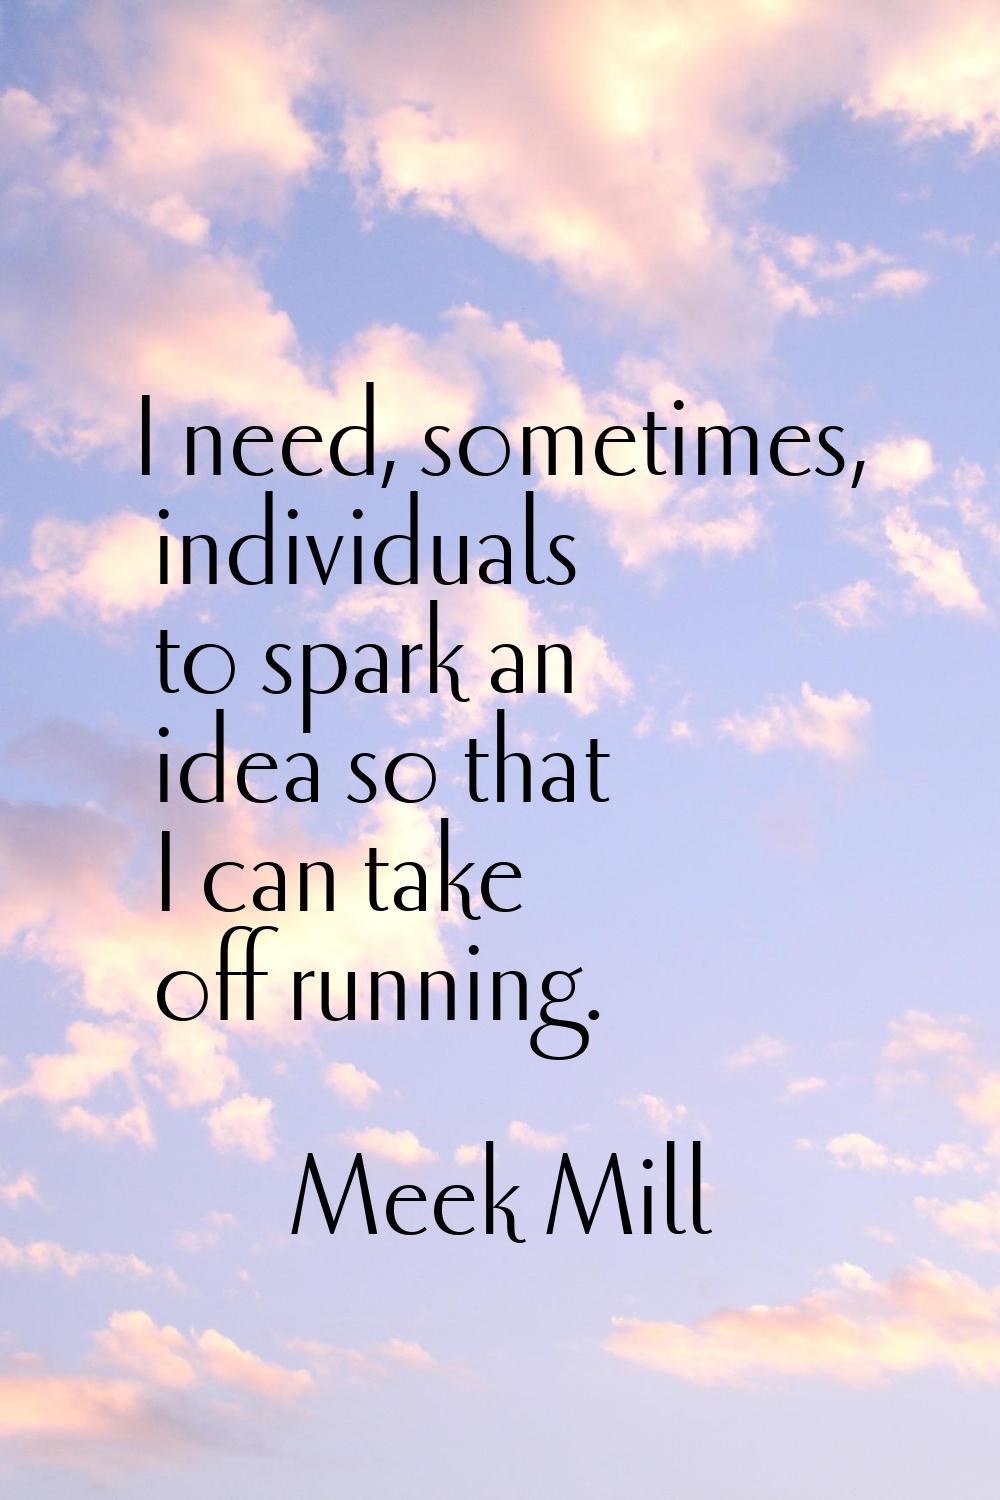 I need, sometimes, individuals to spark an idea so that I can take off running.